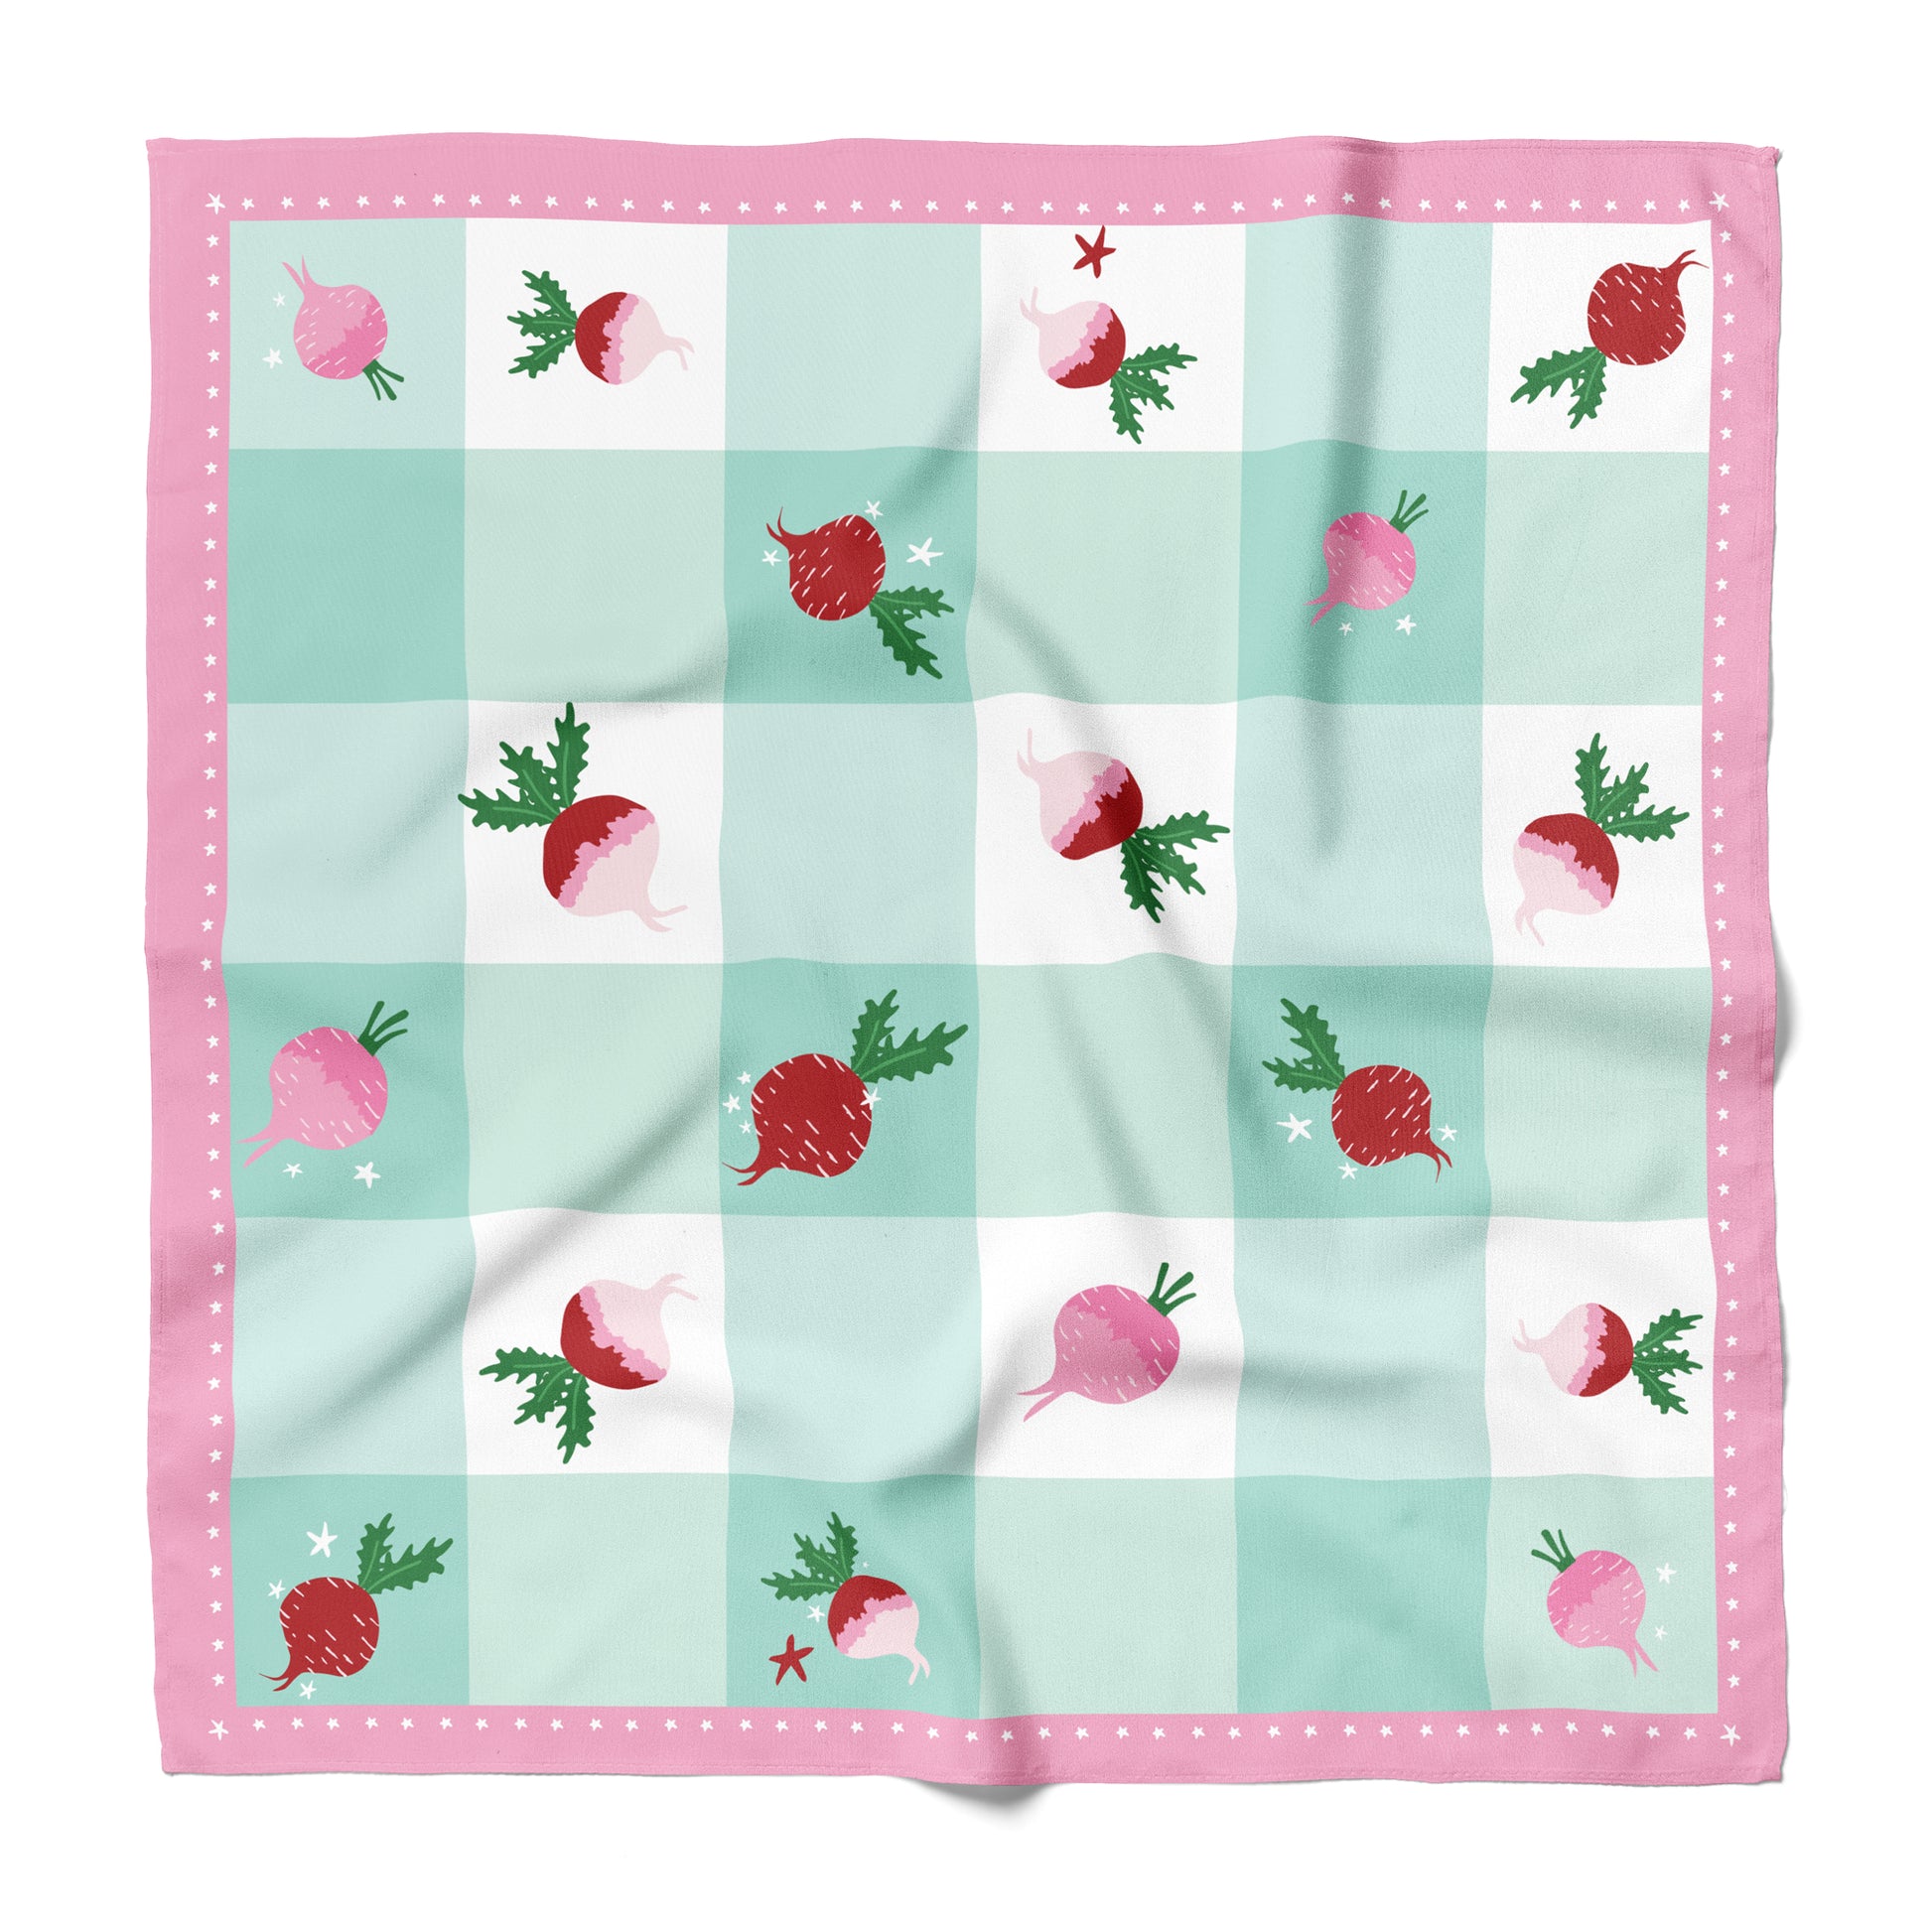 A gingham silk bandana with red radish and pink border.